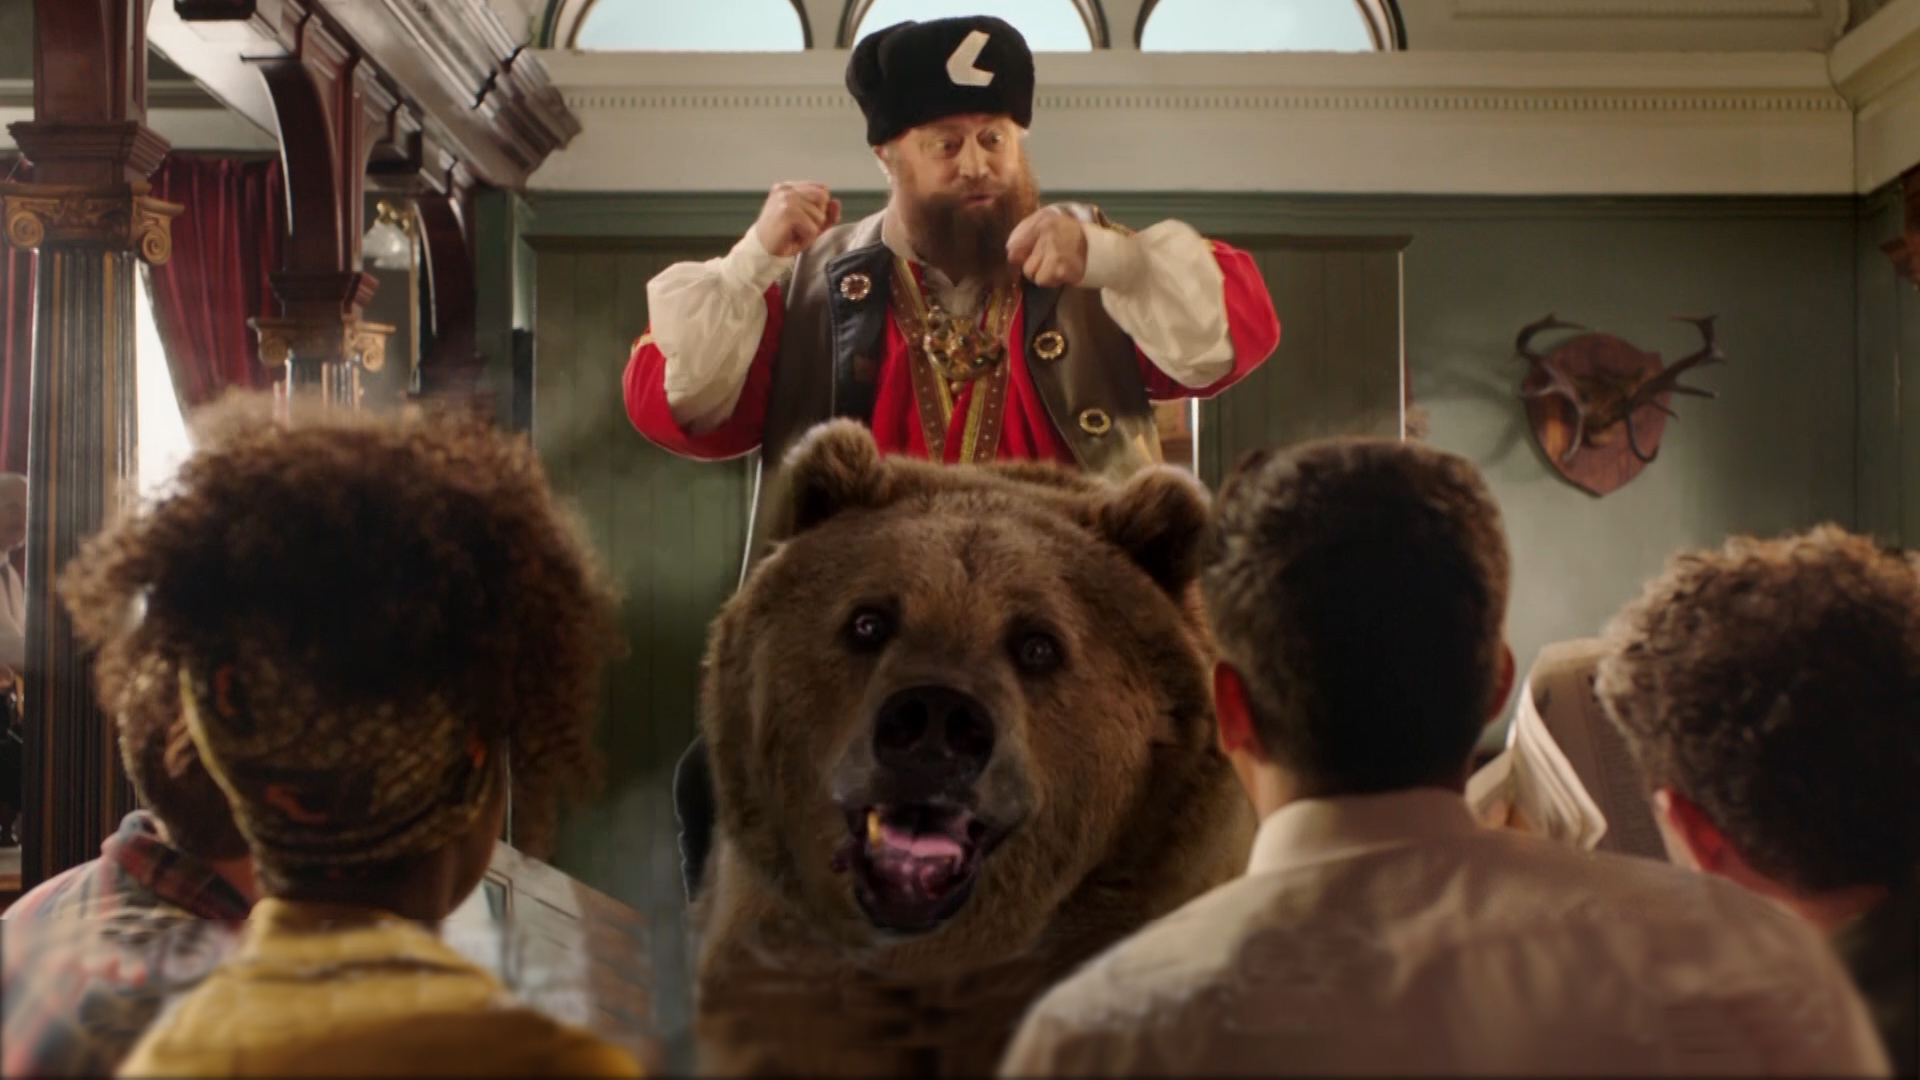 ladbrokes still 3 - GreenScreen Animals Teams Up with MTP and Cravens on Recent 2018 Russia World Cup Ad for Ladbrokes